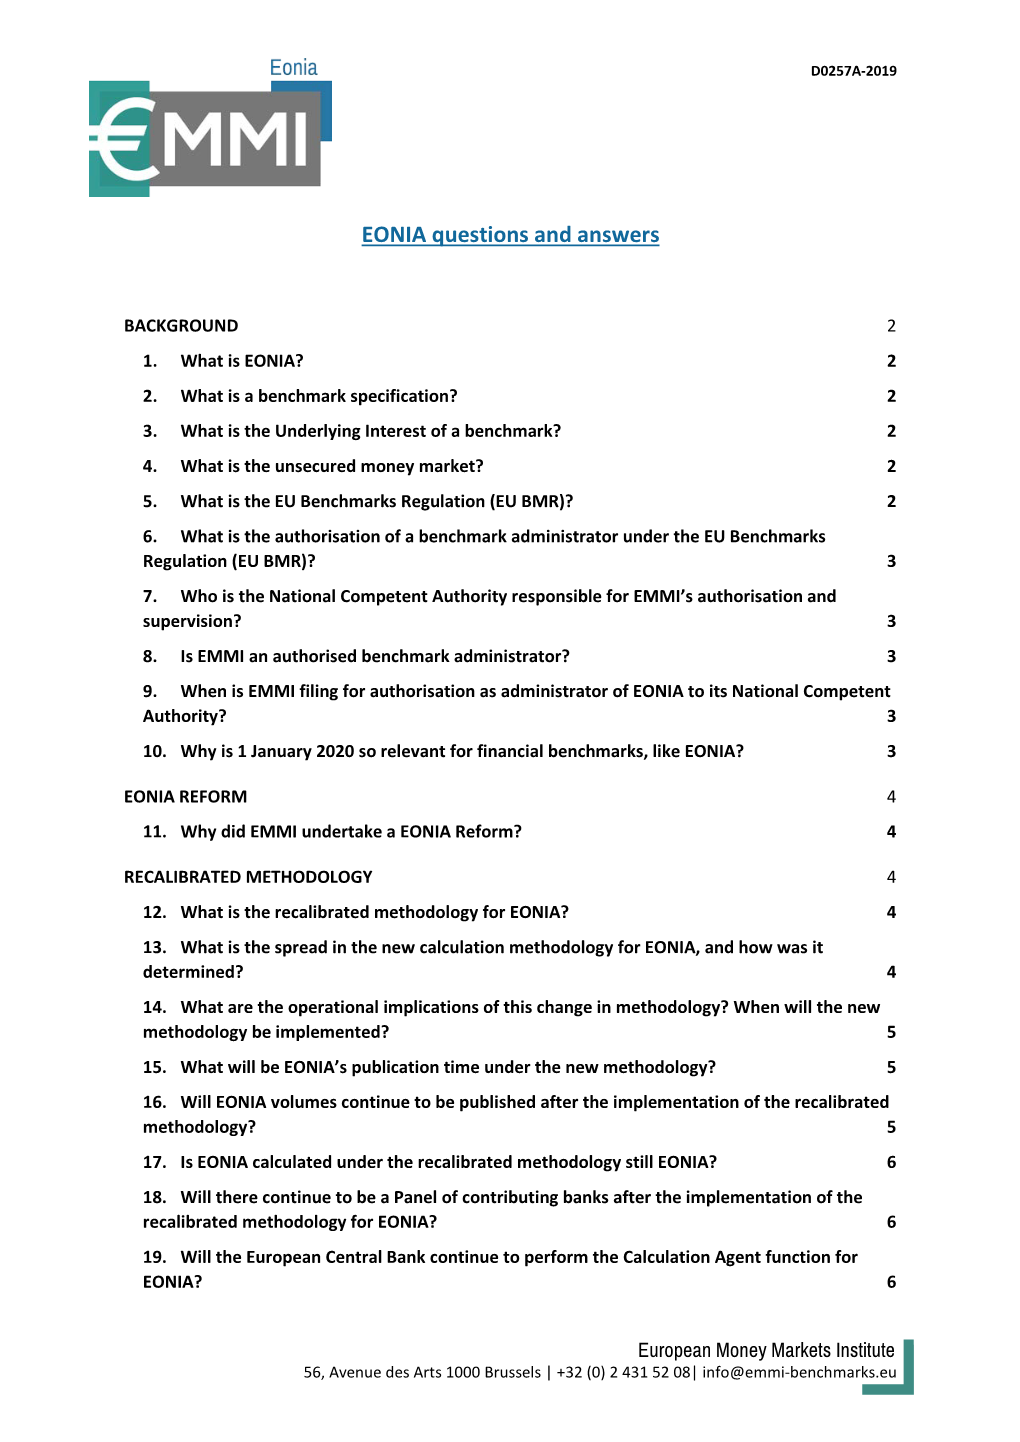 EONIA Questions and Answers